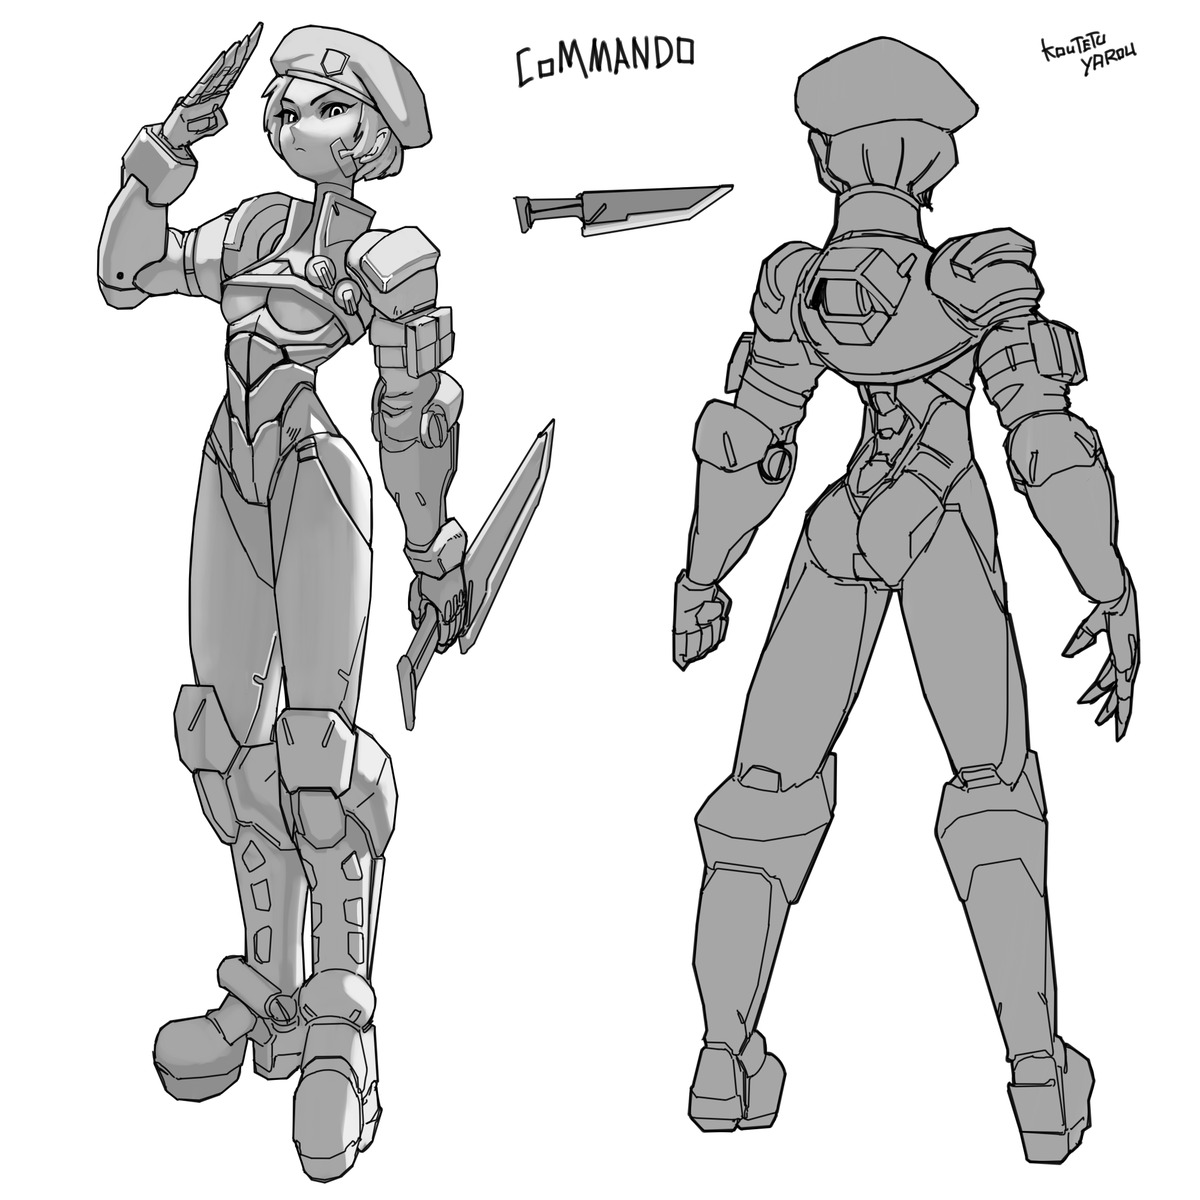 Character design commission from @/ProjectHeat1. 
COMMANDO. 